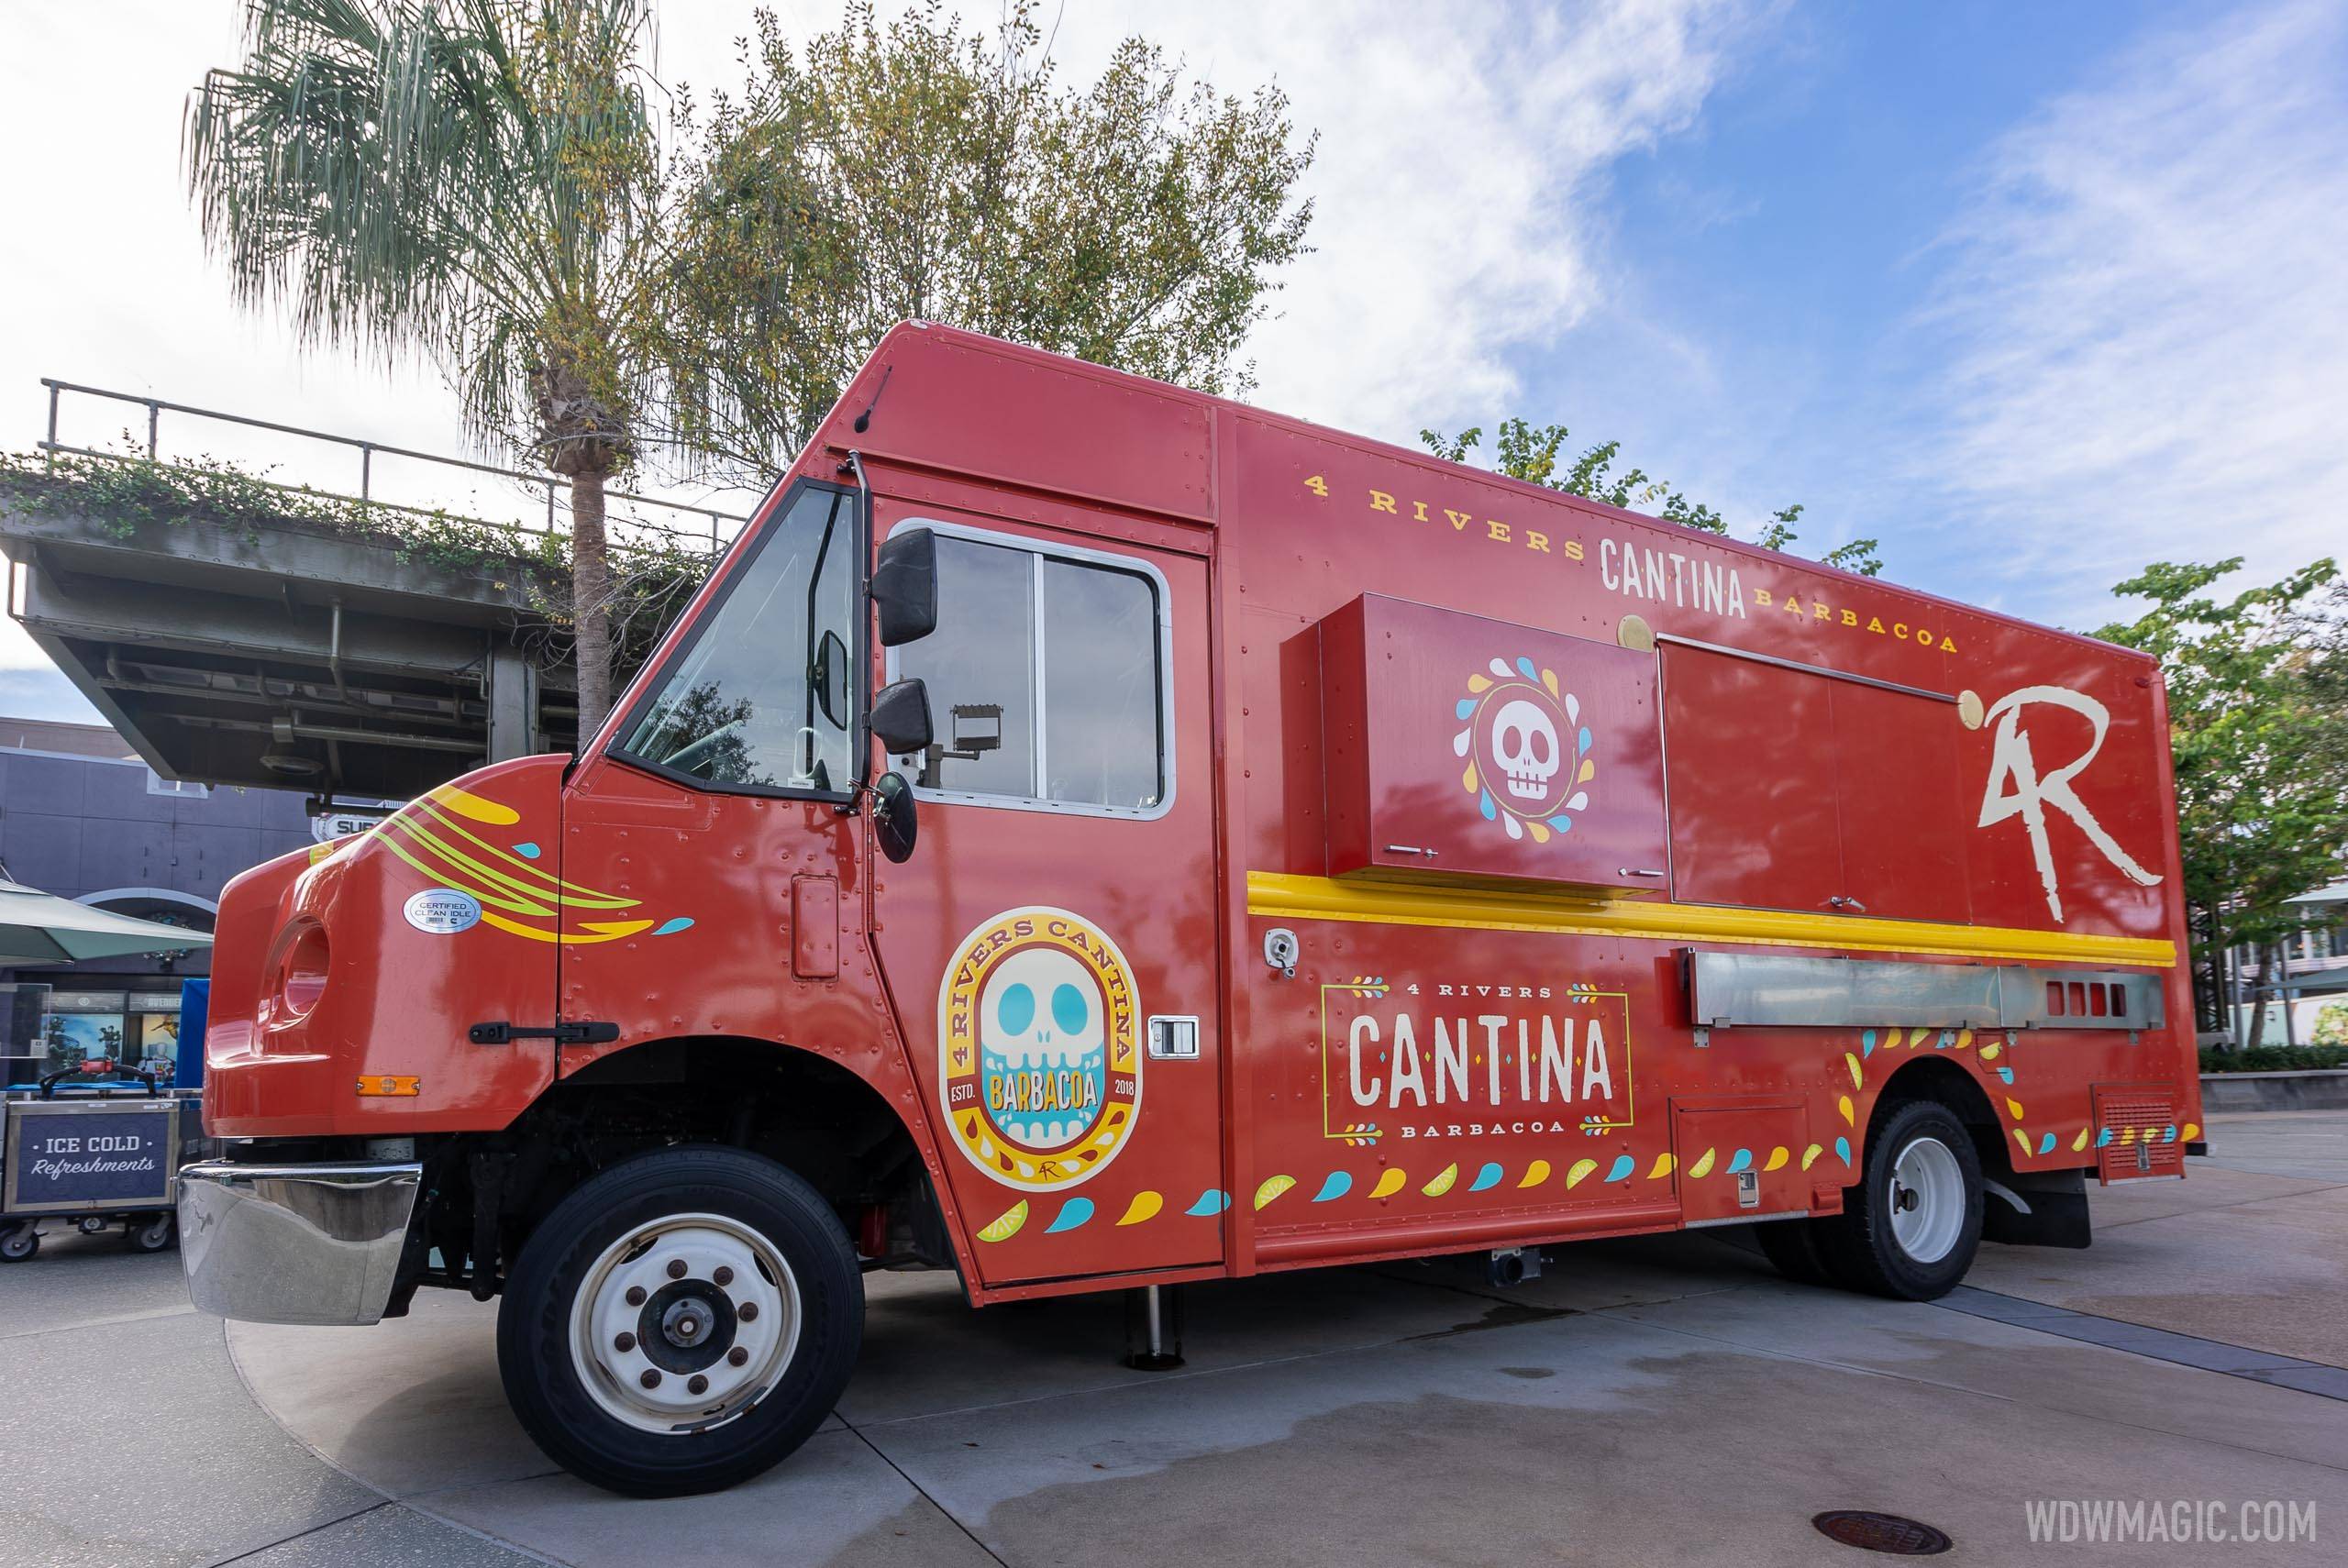 4R Cantina Barbacoa Food Truck on the West Side - December 2020